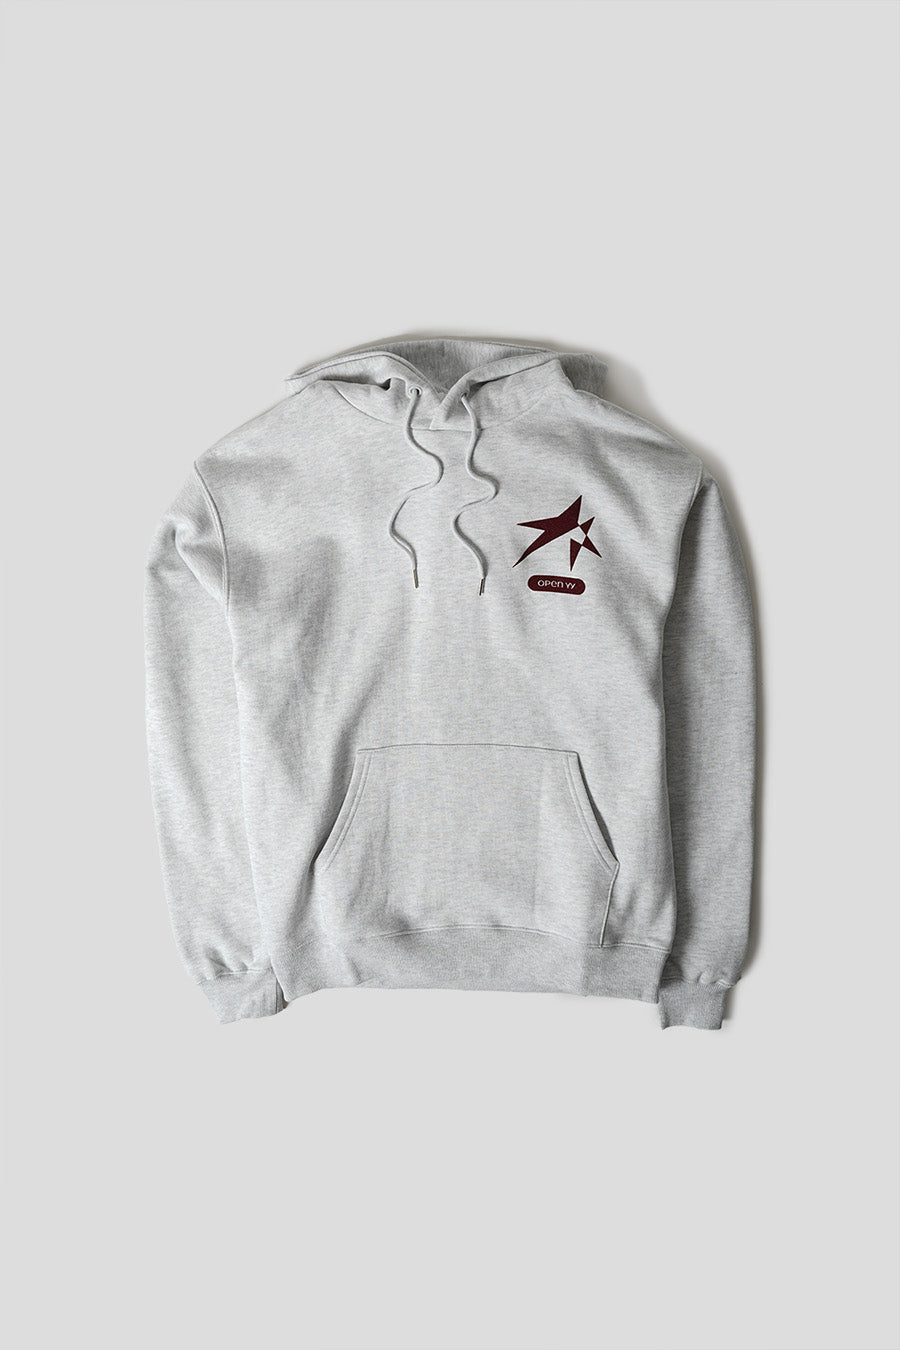 Open YY - MOUNTAIN GRAPHIC HOODIE LIGHT GREY - LE LABO STORE